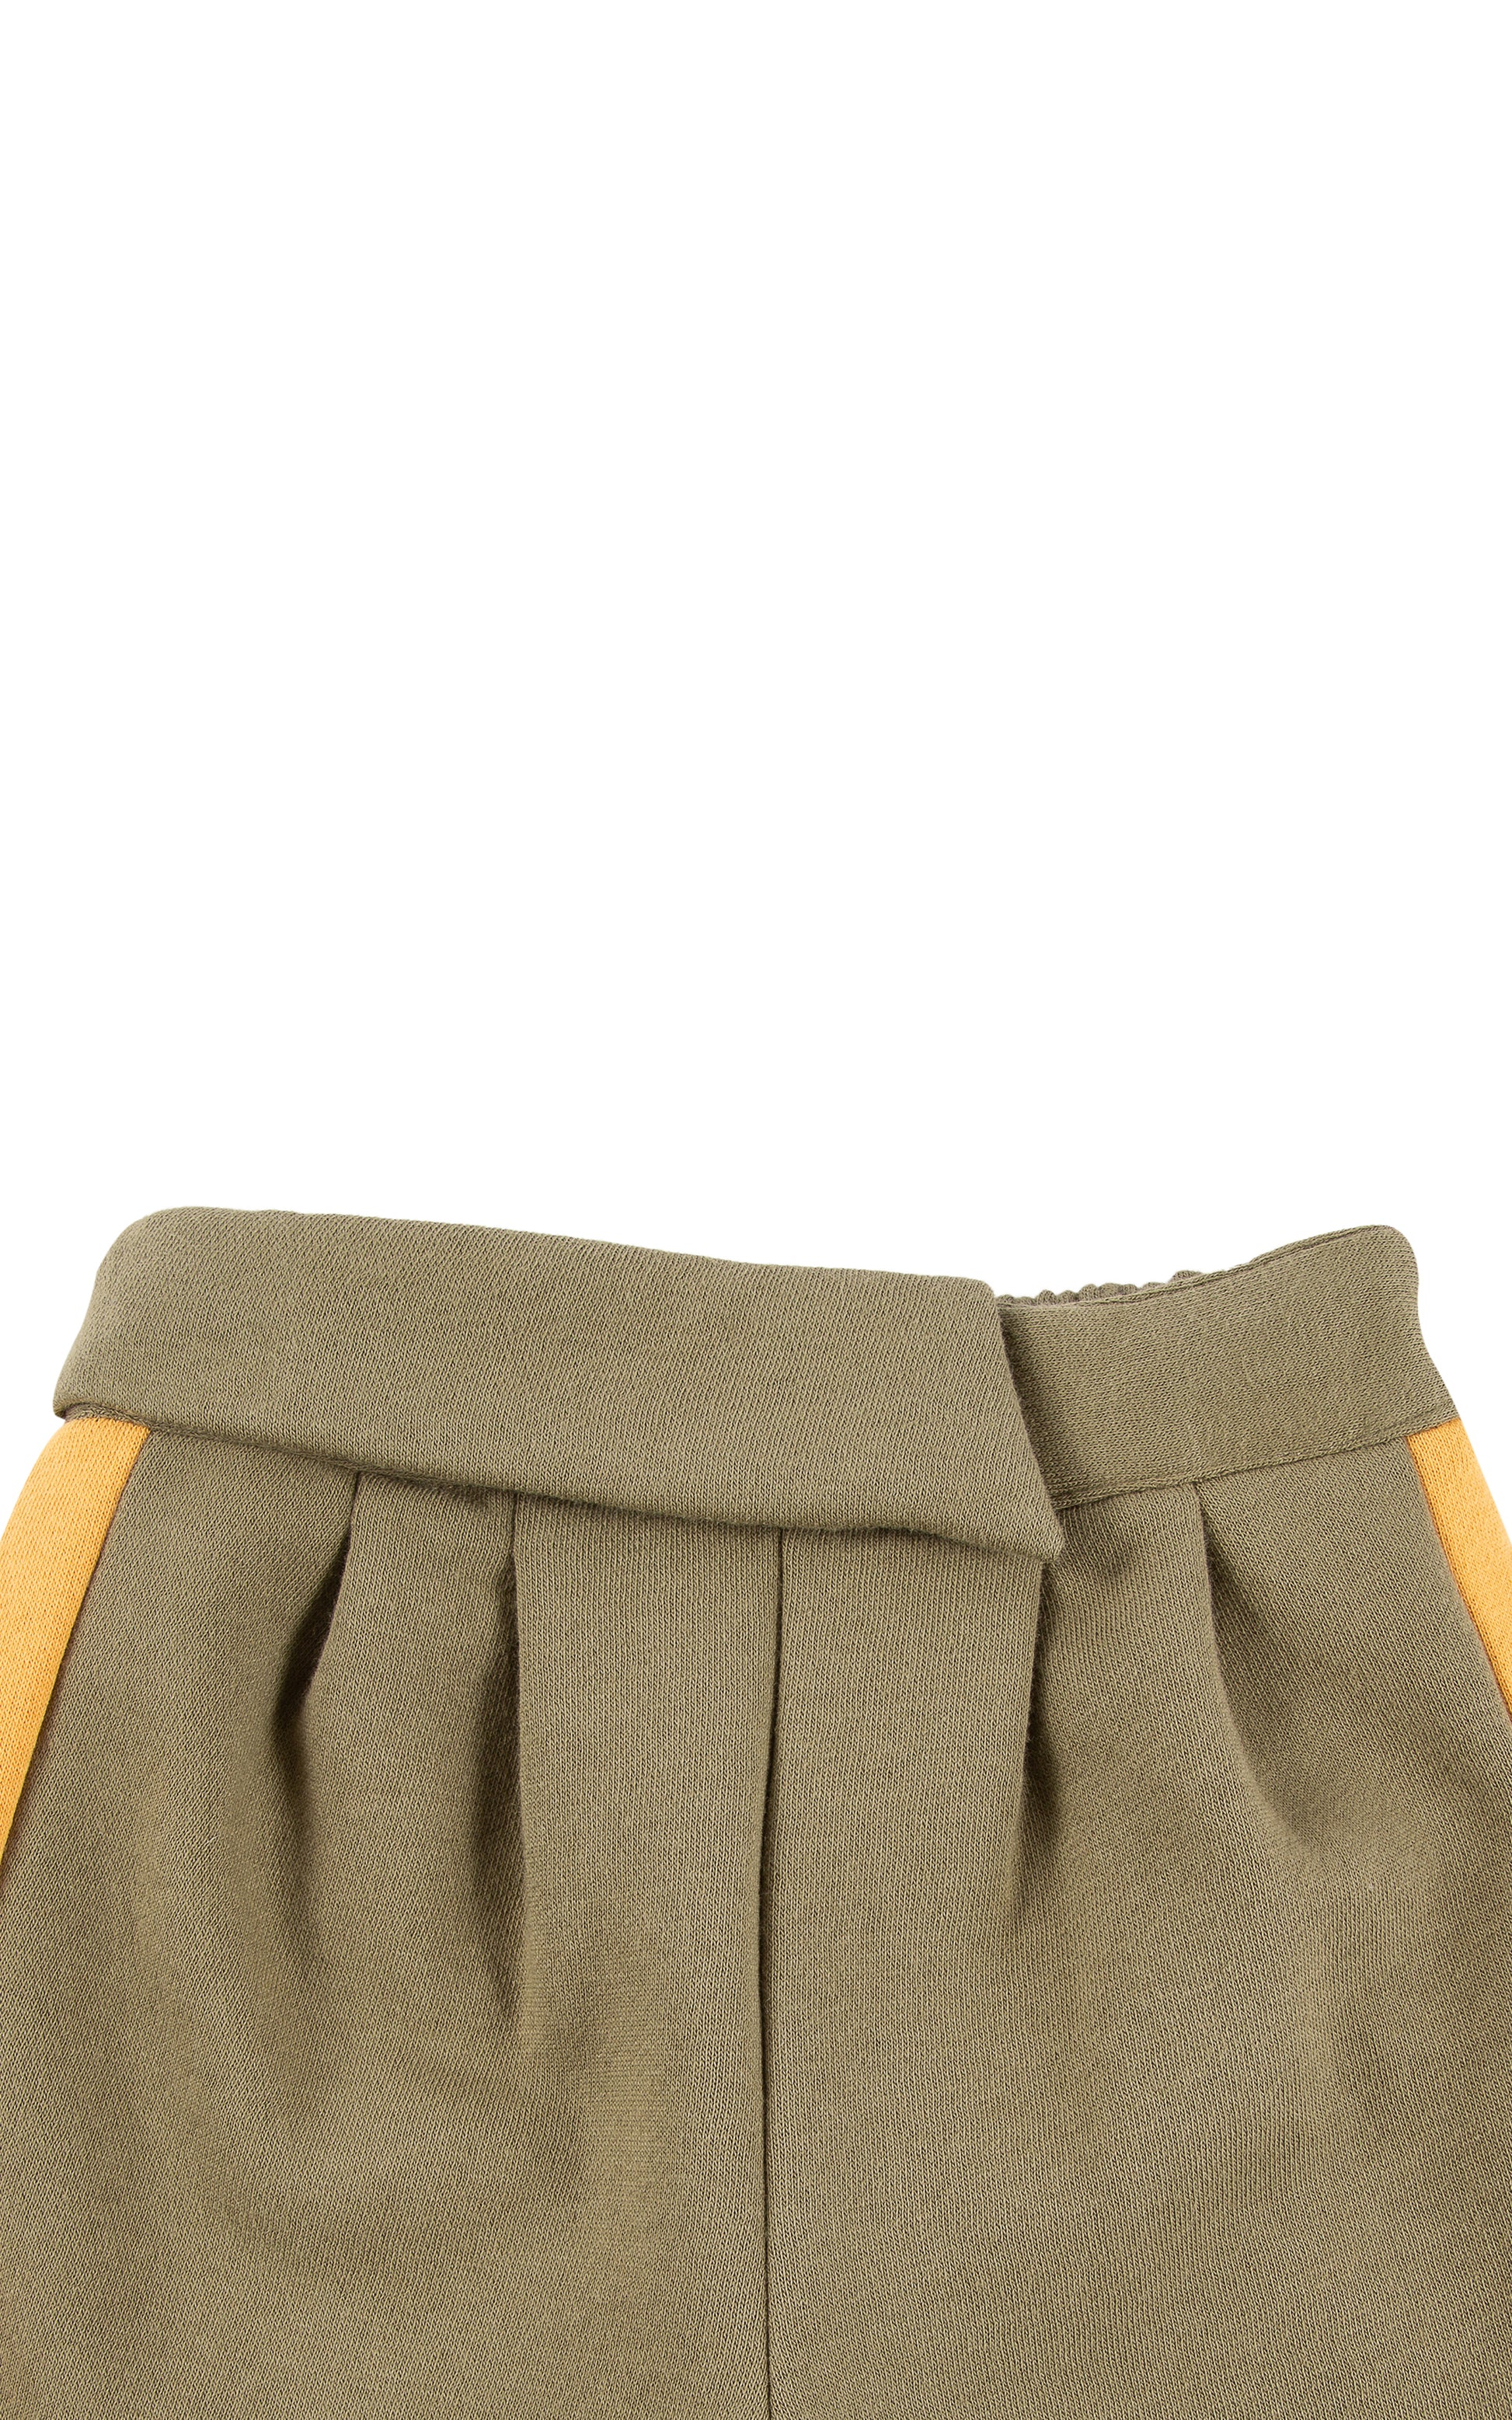 Front view of olive hoodie set pant  with yellow side stripe detail 